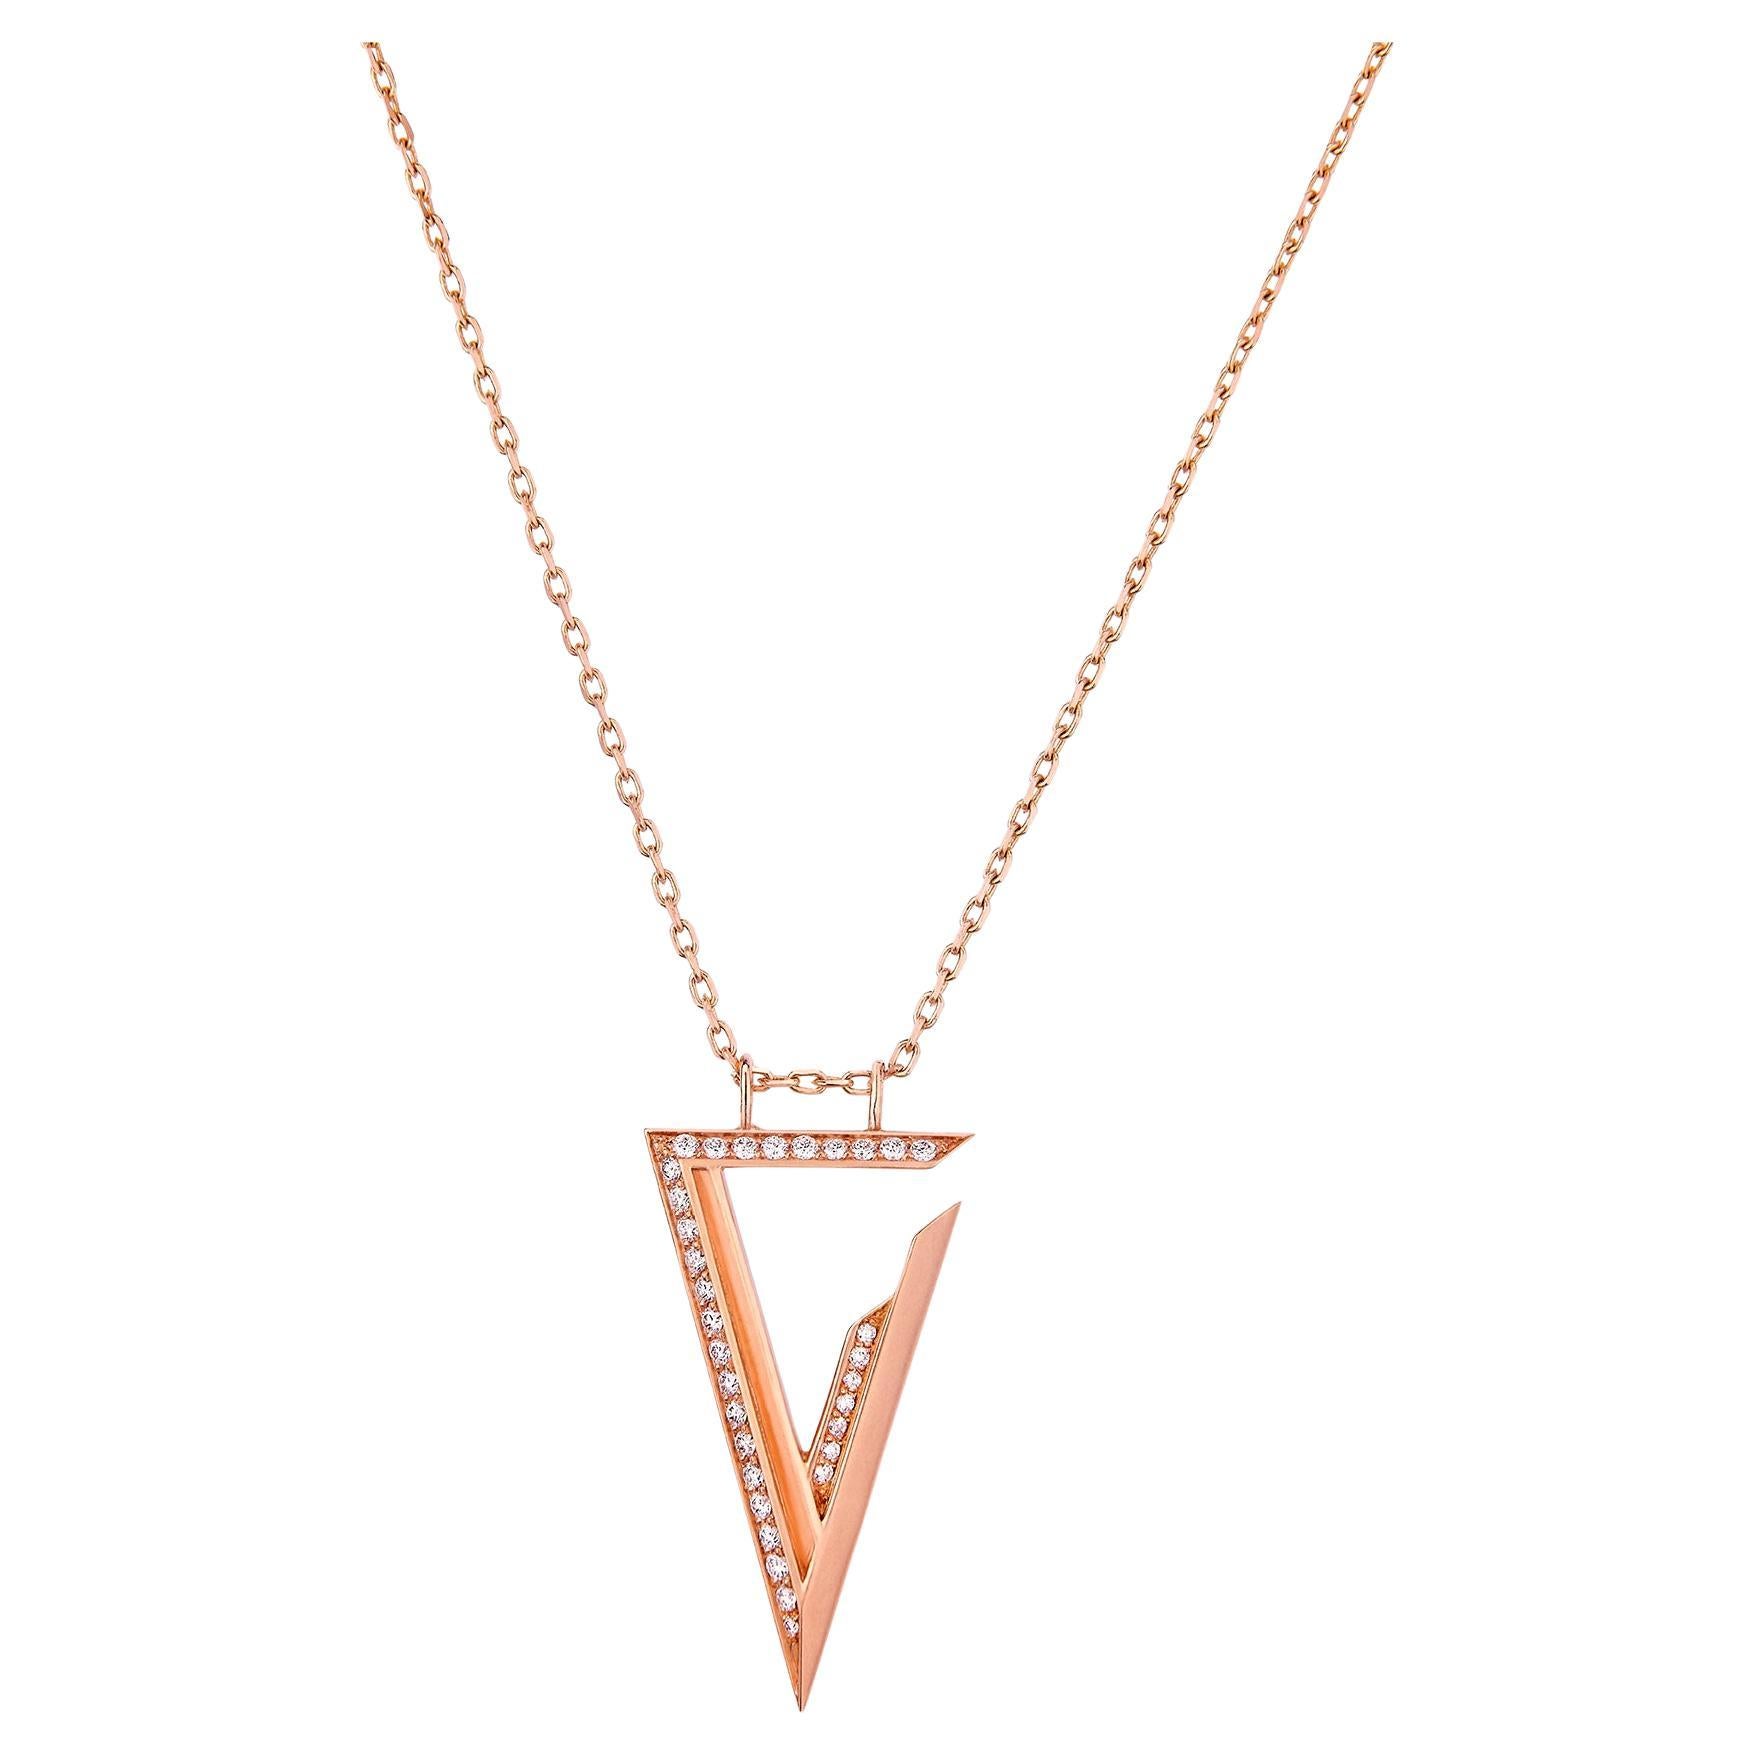 Large Pendant with Chain Crafted in 18K Rose Gold & White Diamonds 0.31 ct. For Sale